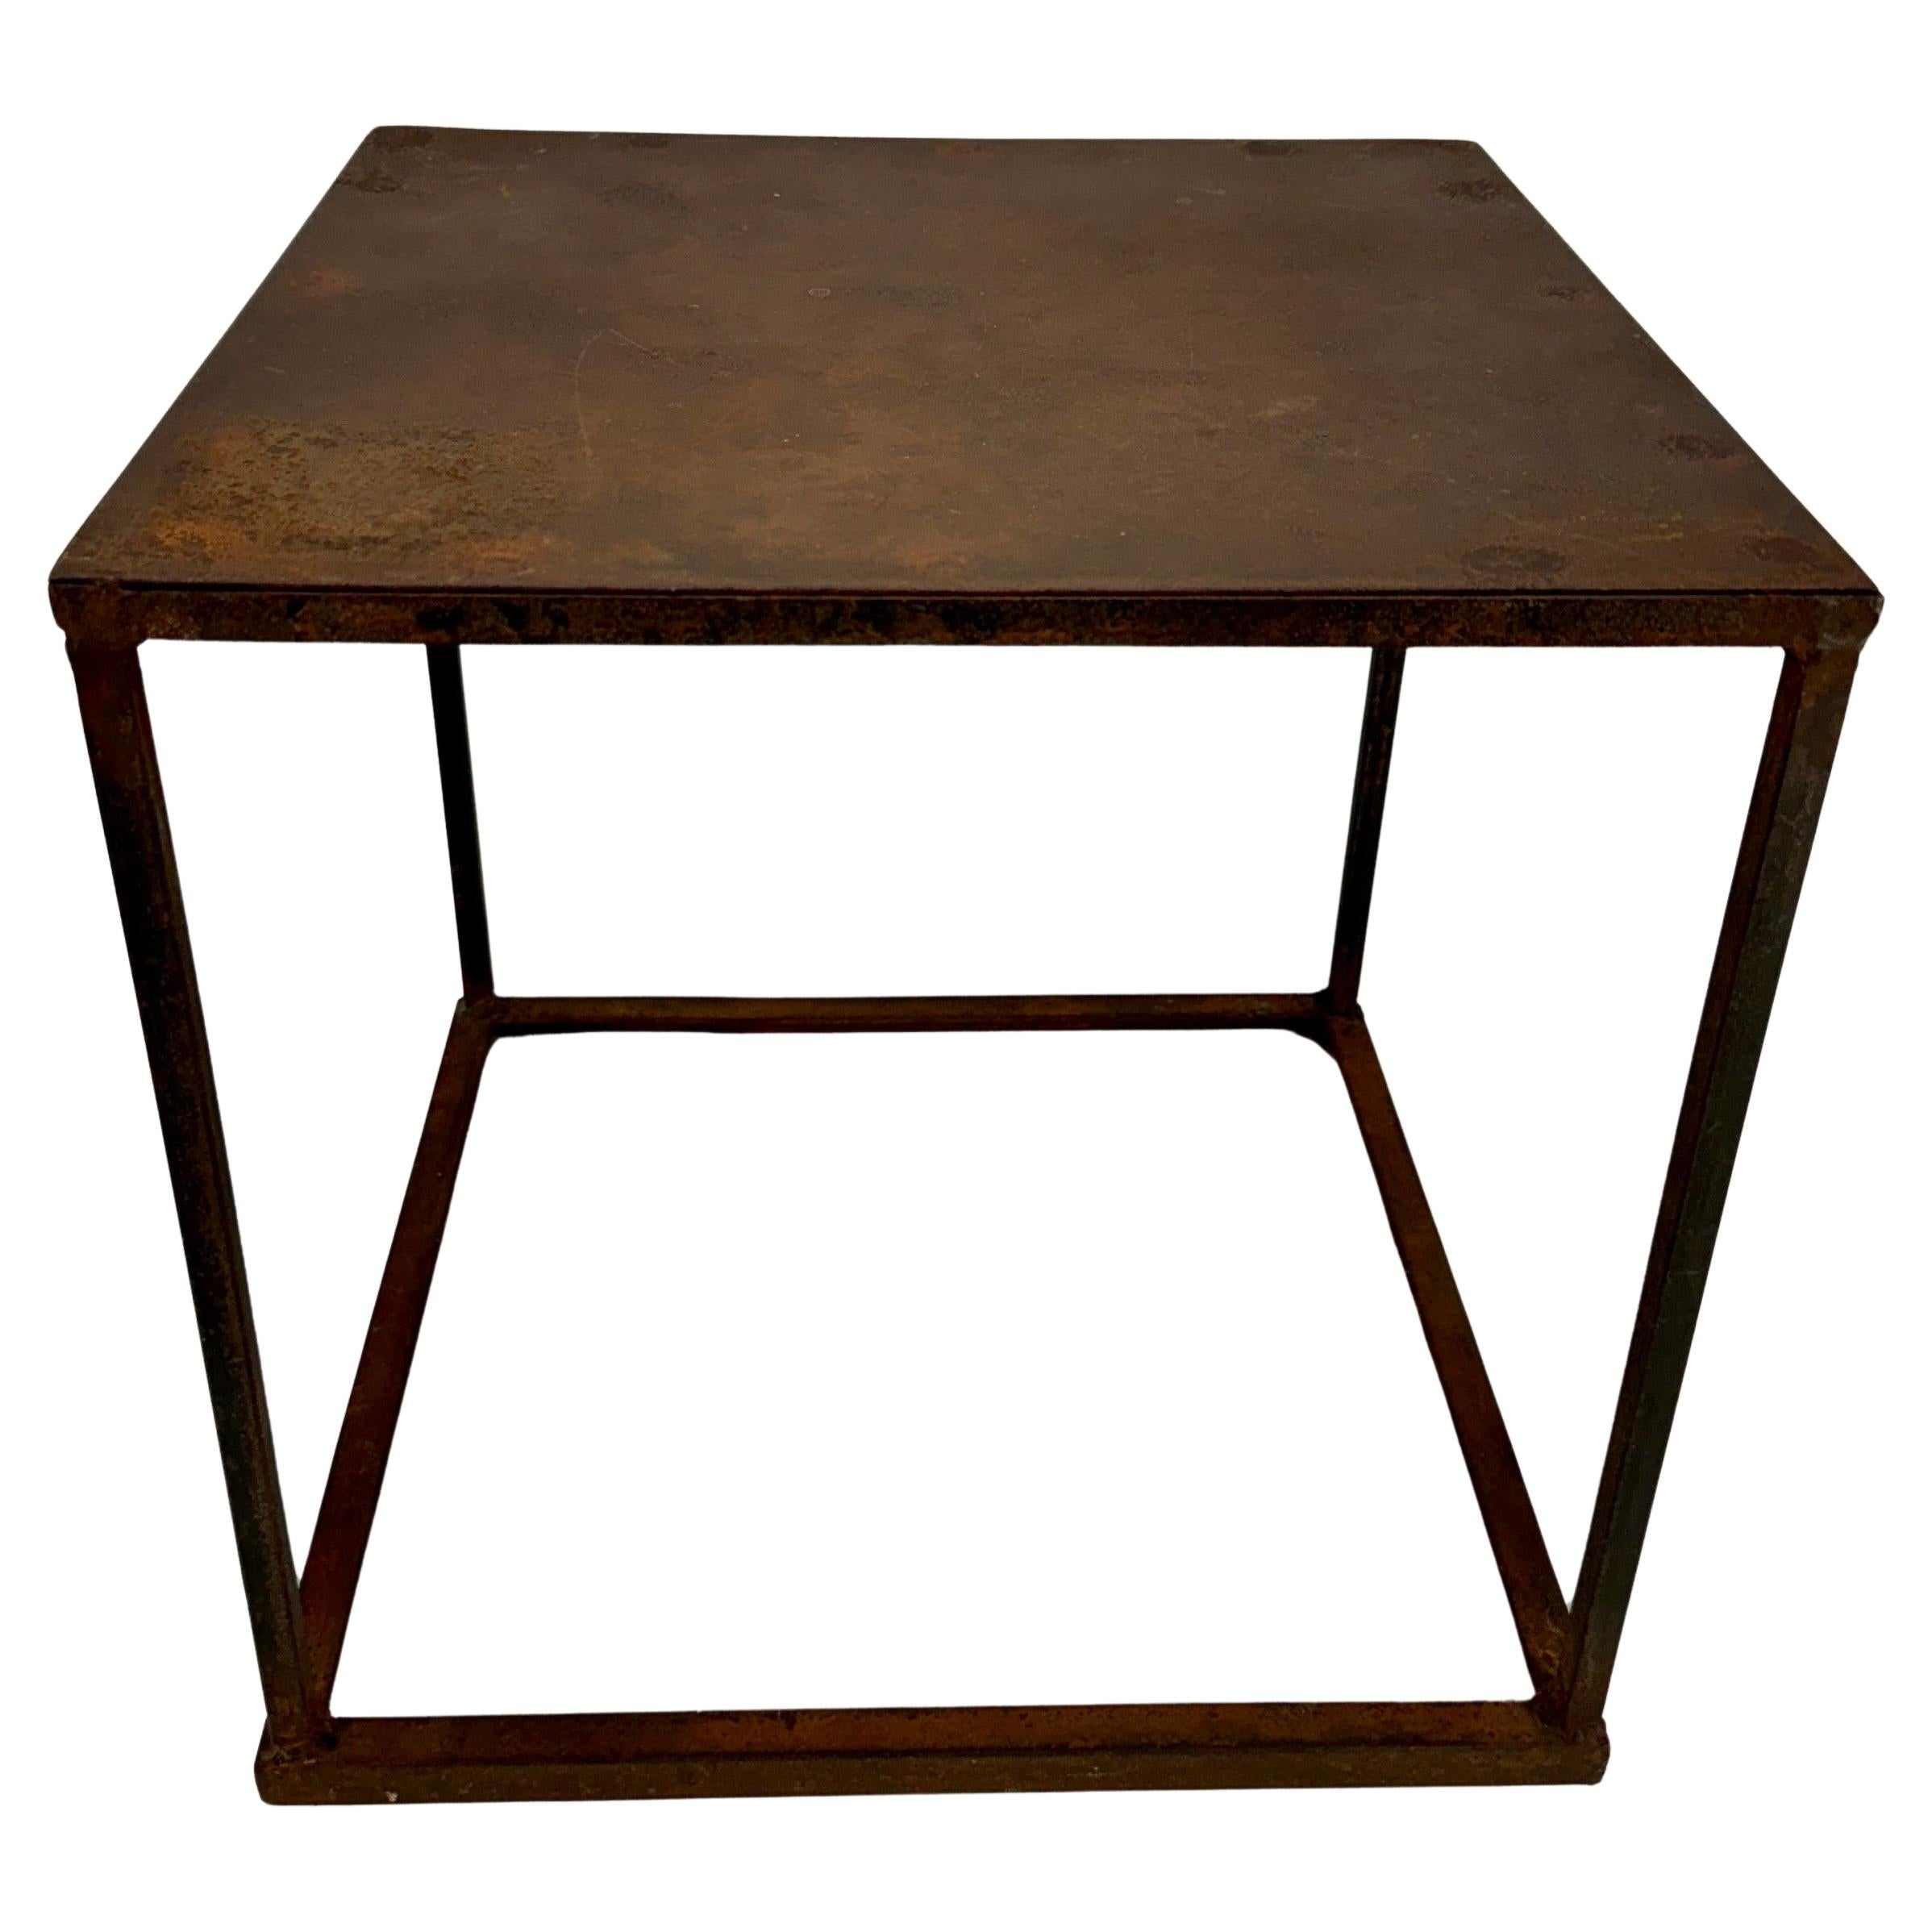 Vintage Industrial Square Cube Iron Side Table, American 1960´s For Sale